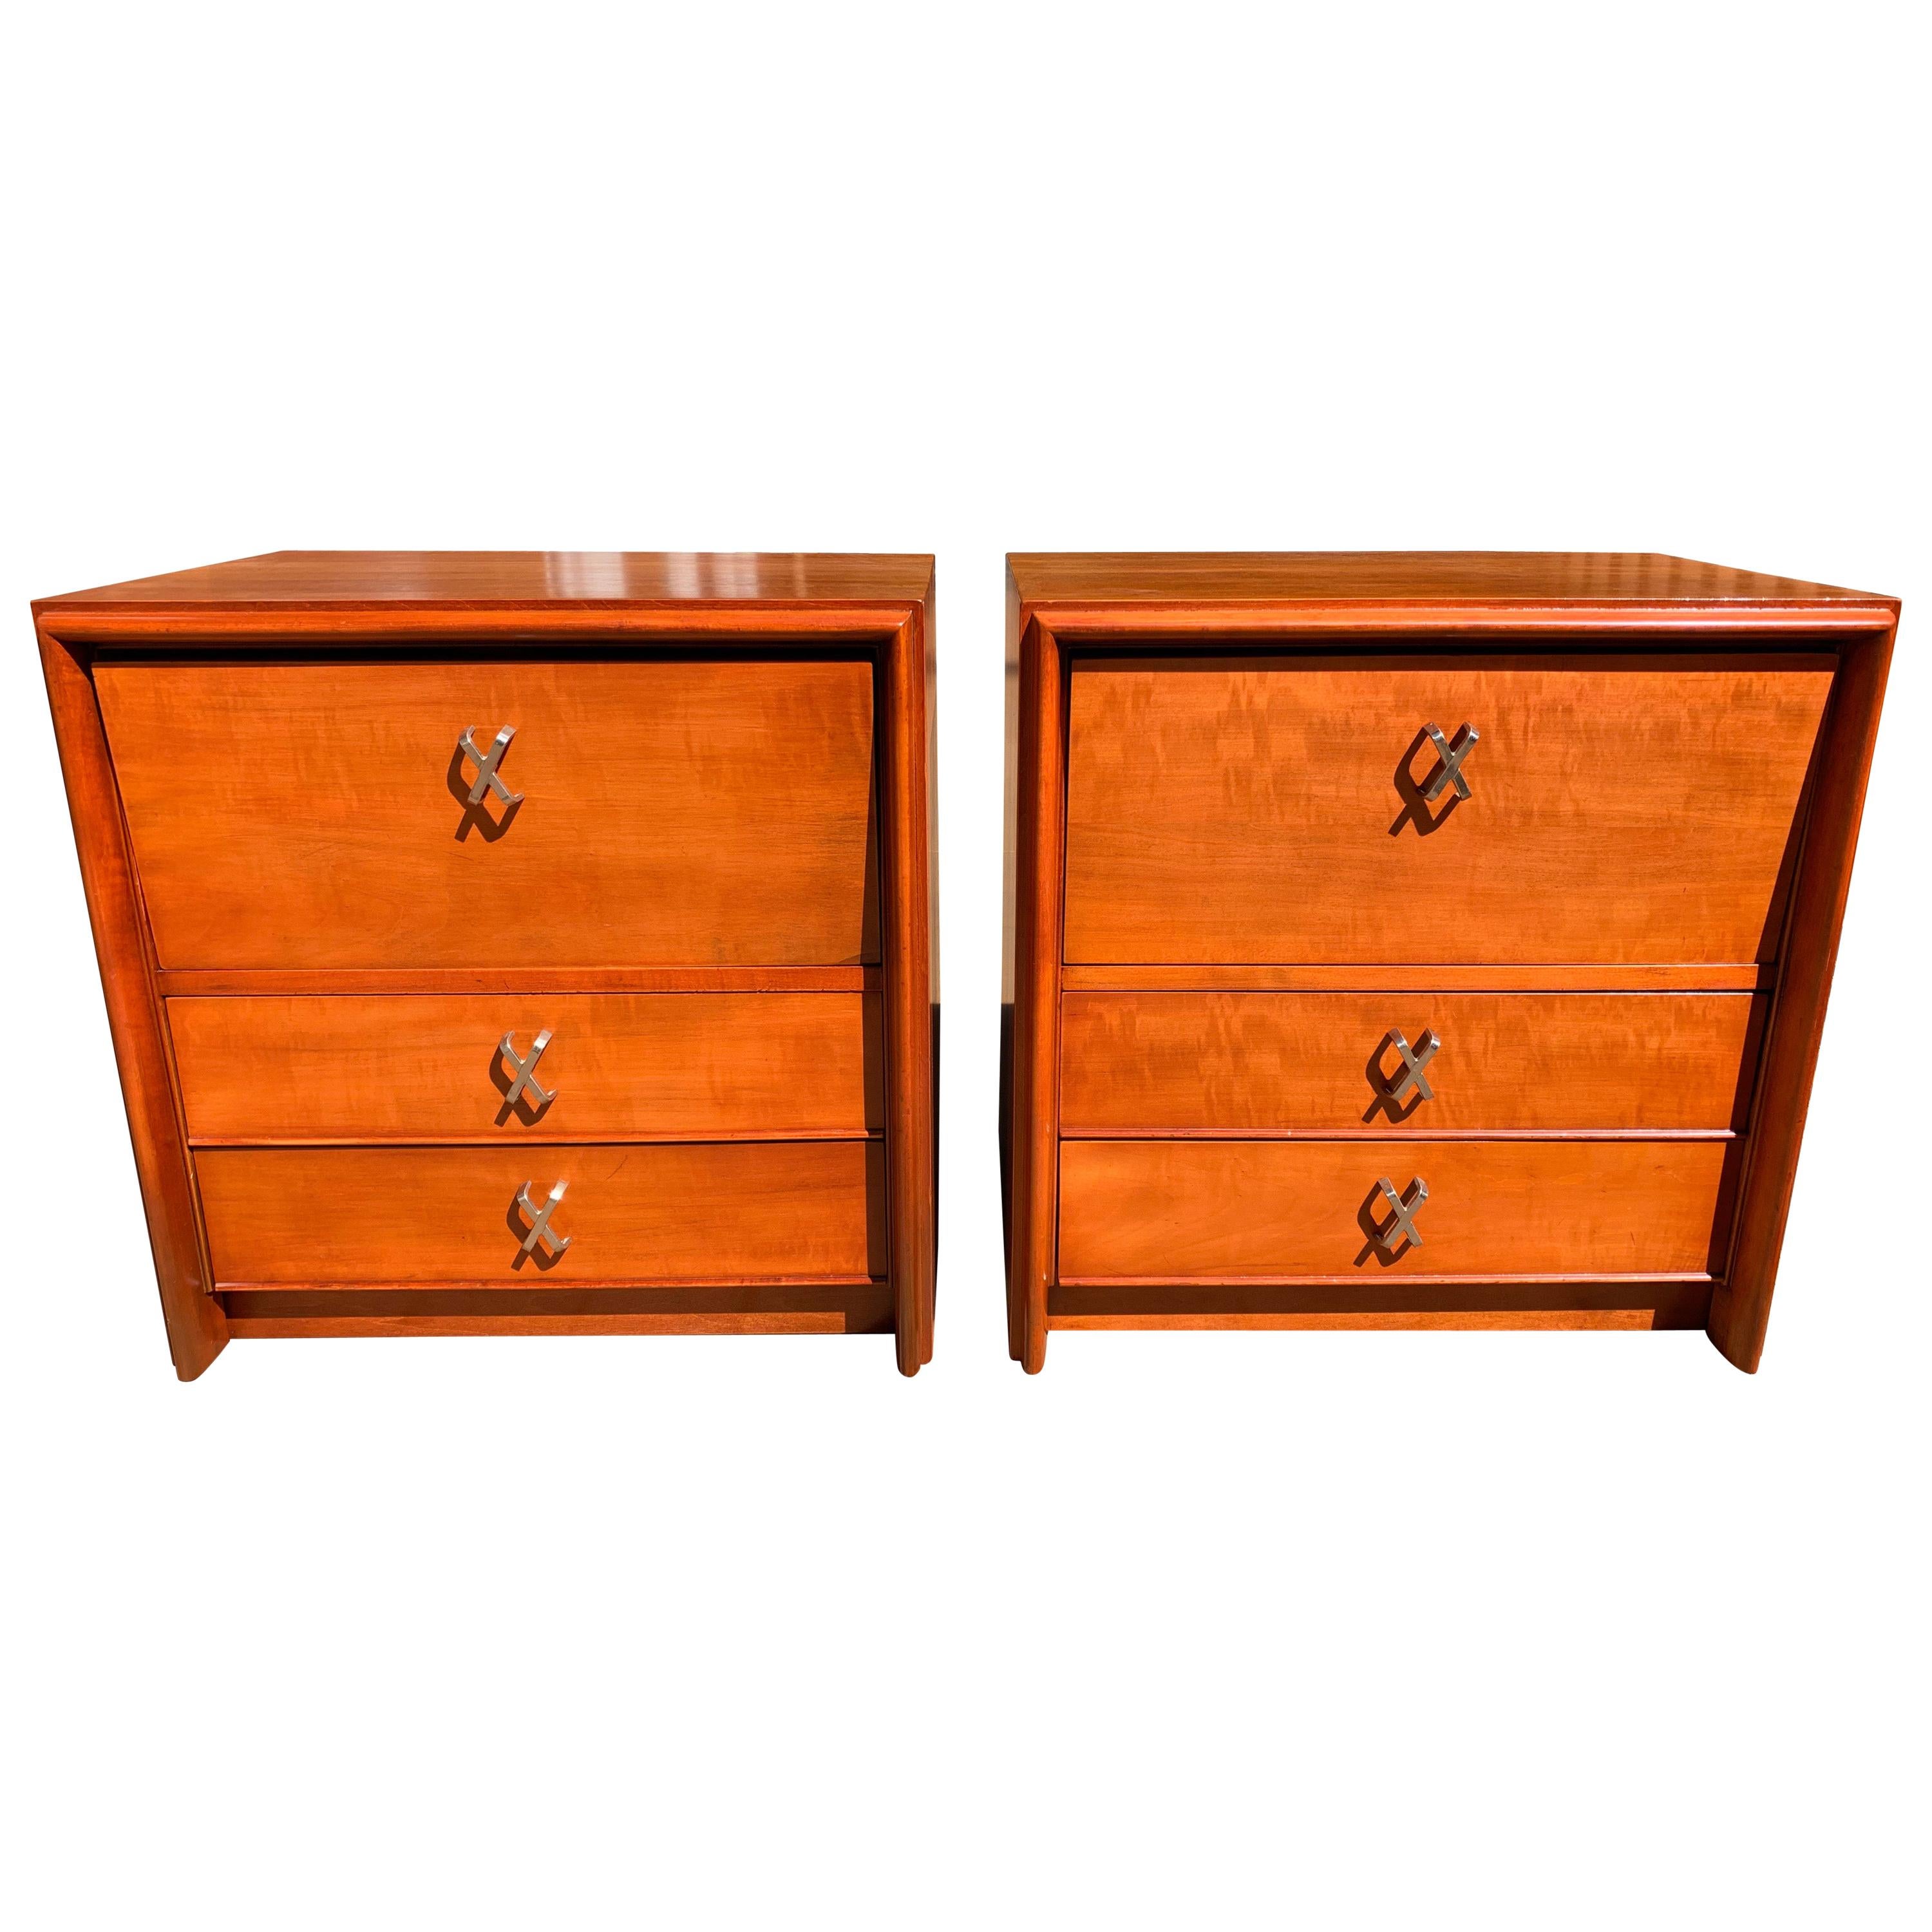 Pair of Paul Frankl for Johnson Furniture Cherry Nightstands with Nickel X-Pulls